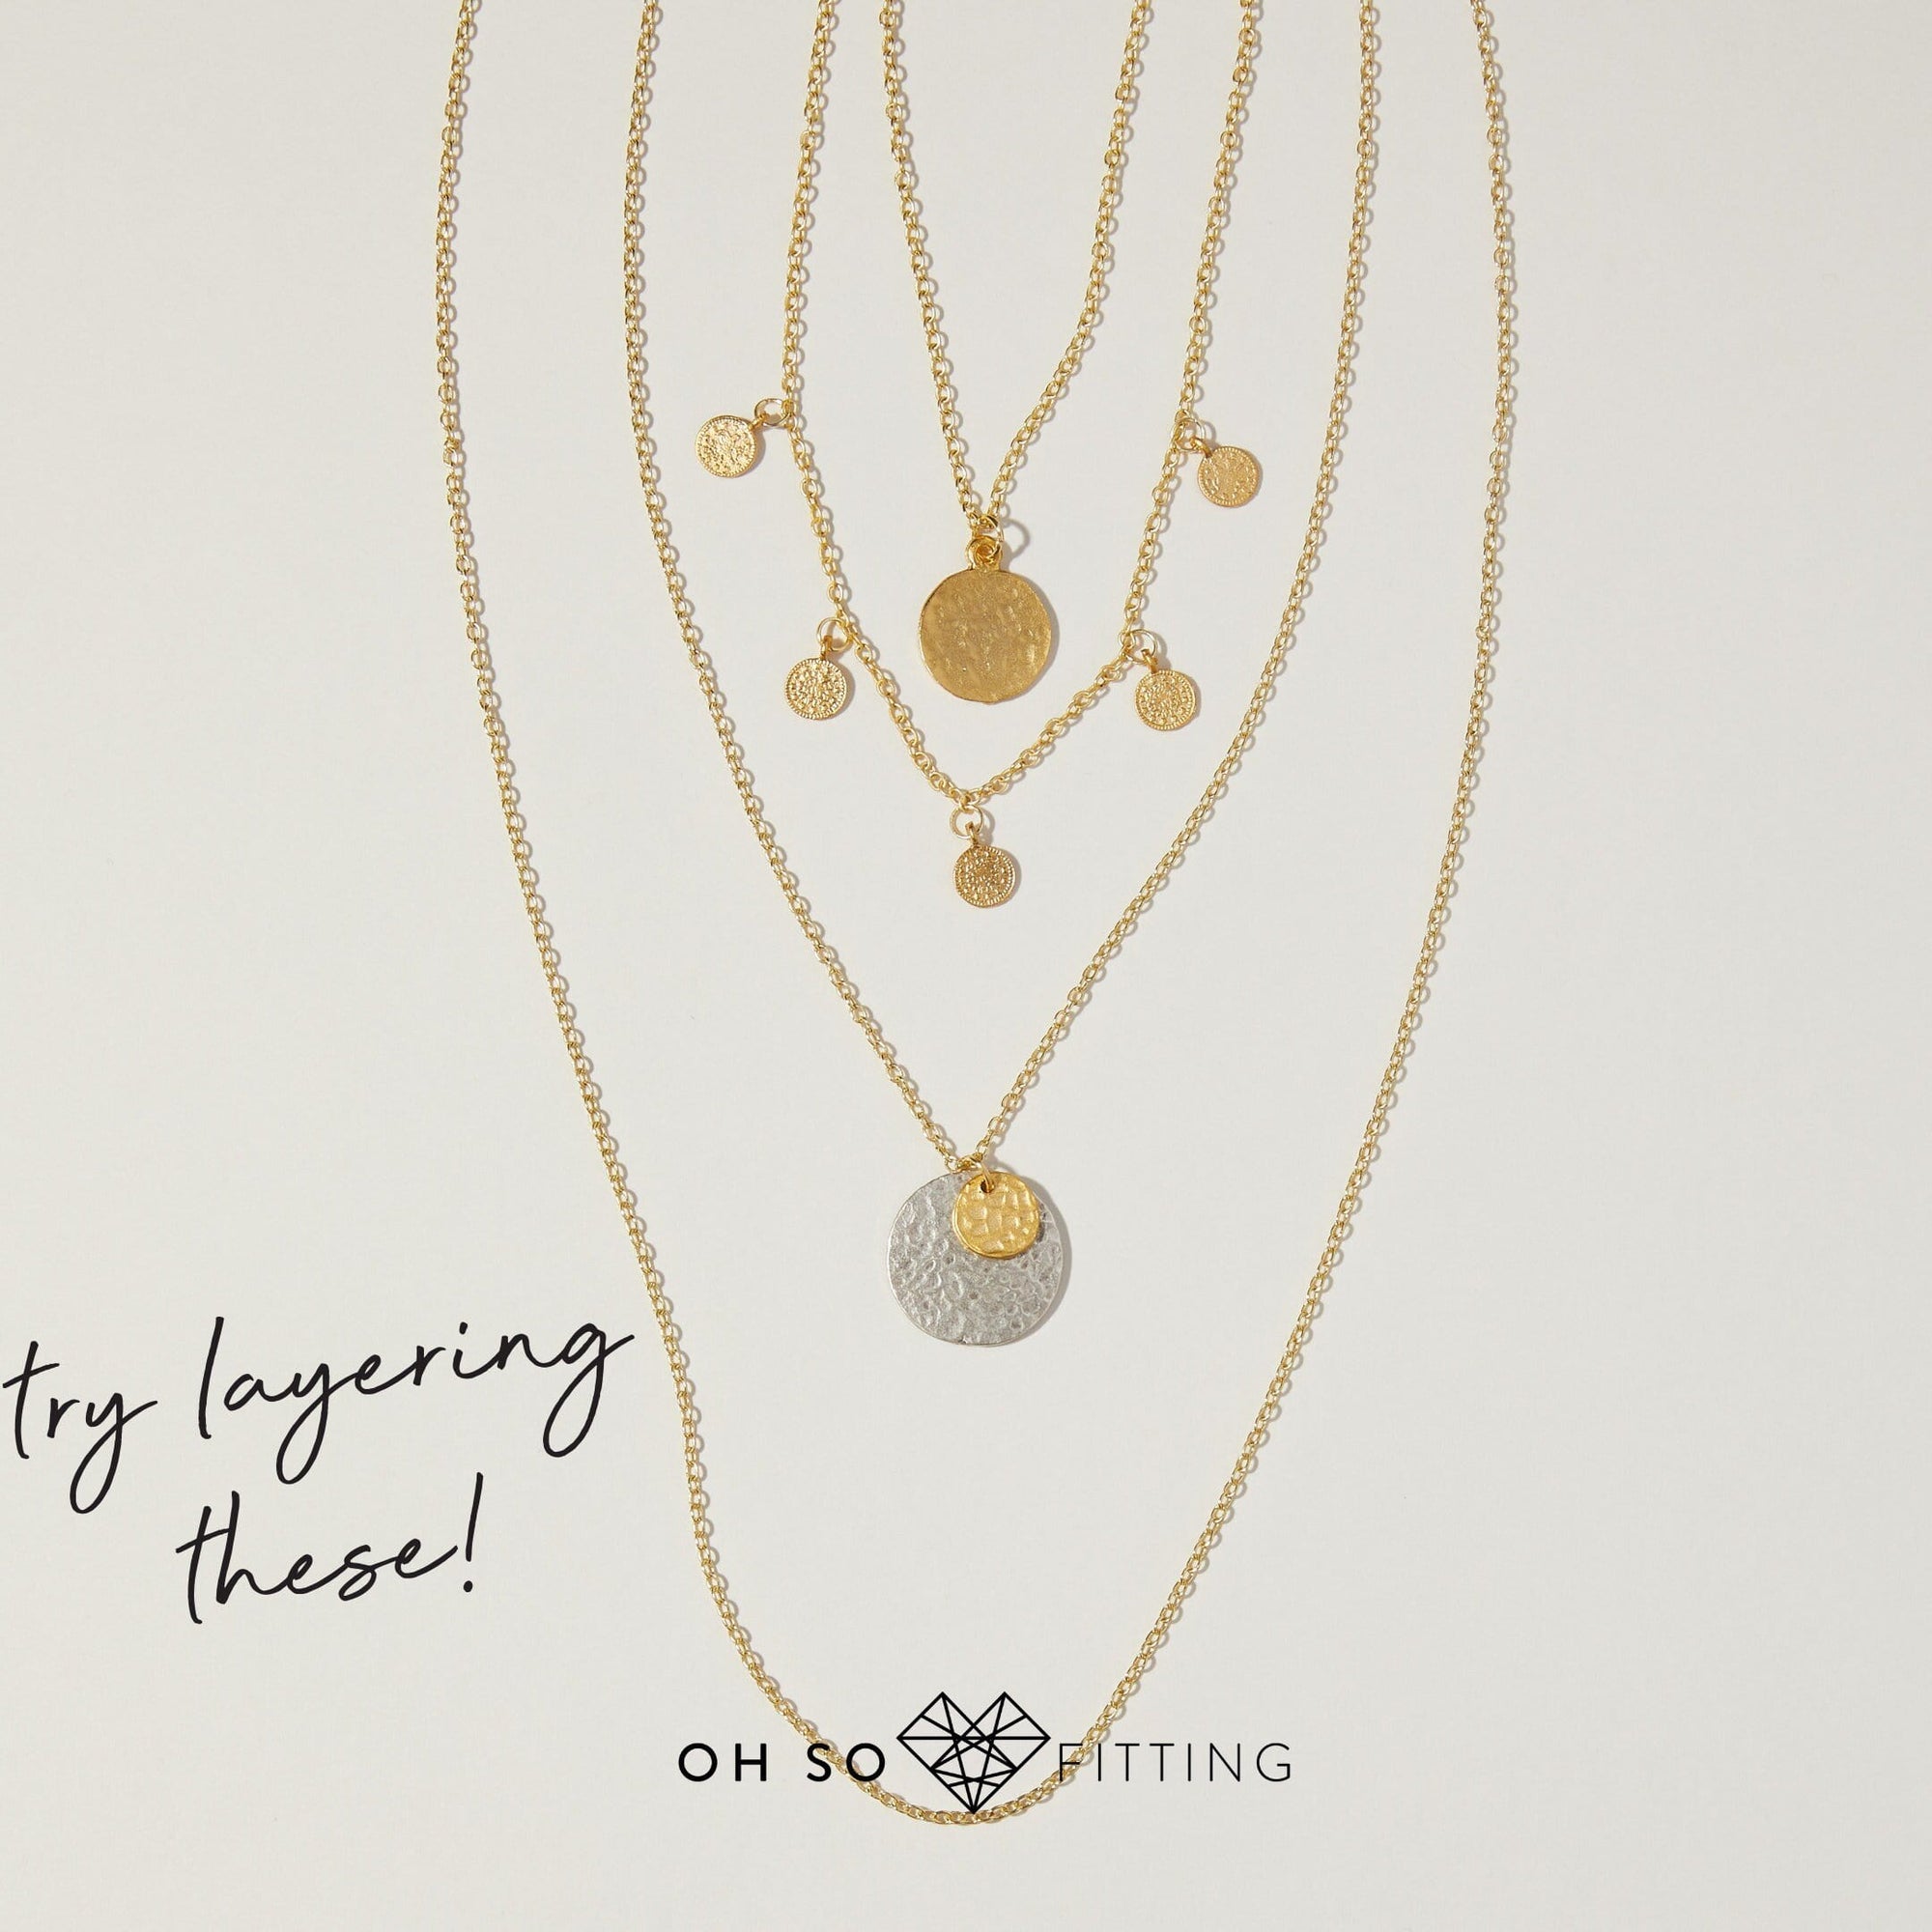 "L'Or" Layering Coin Necklaces